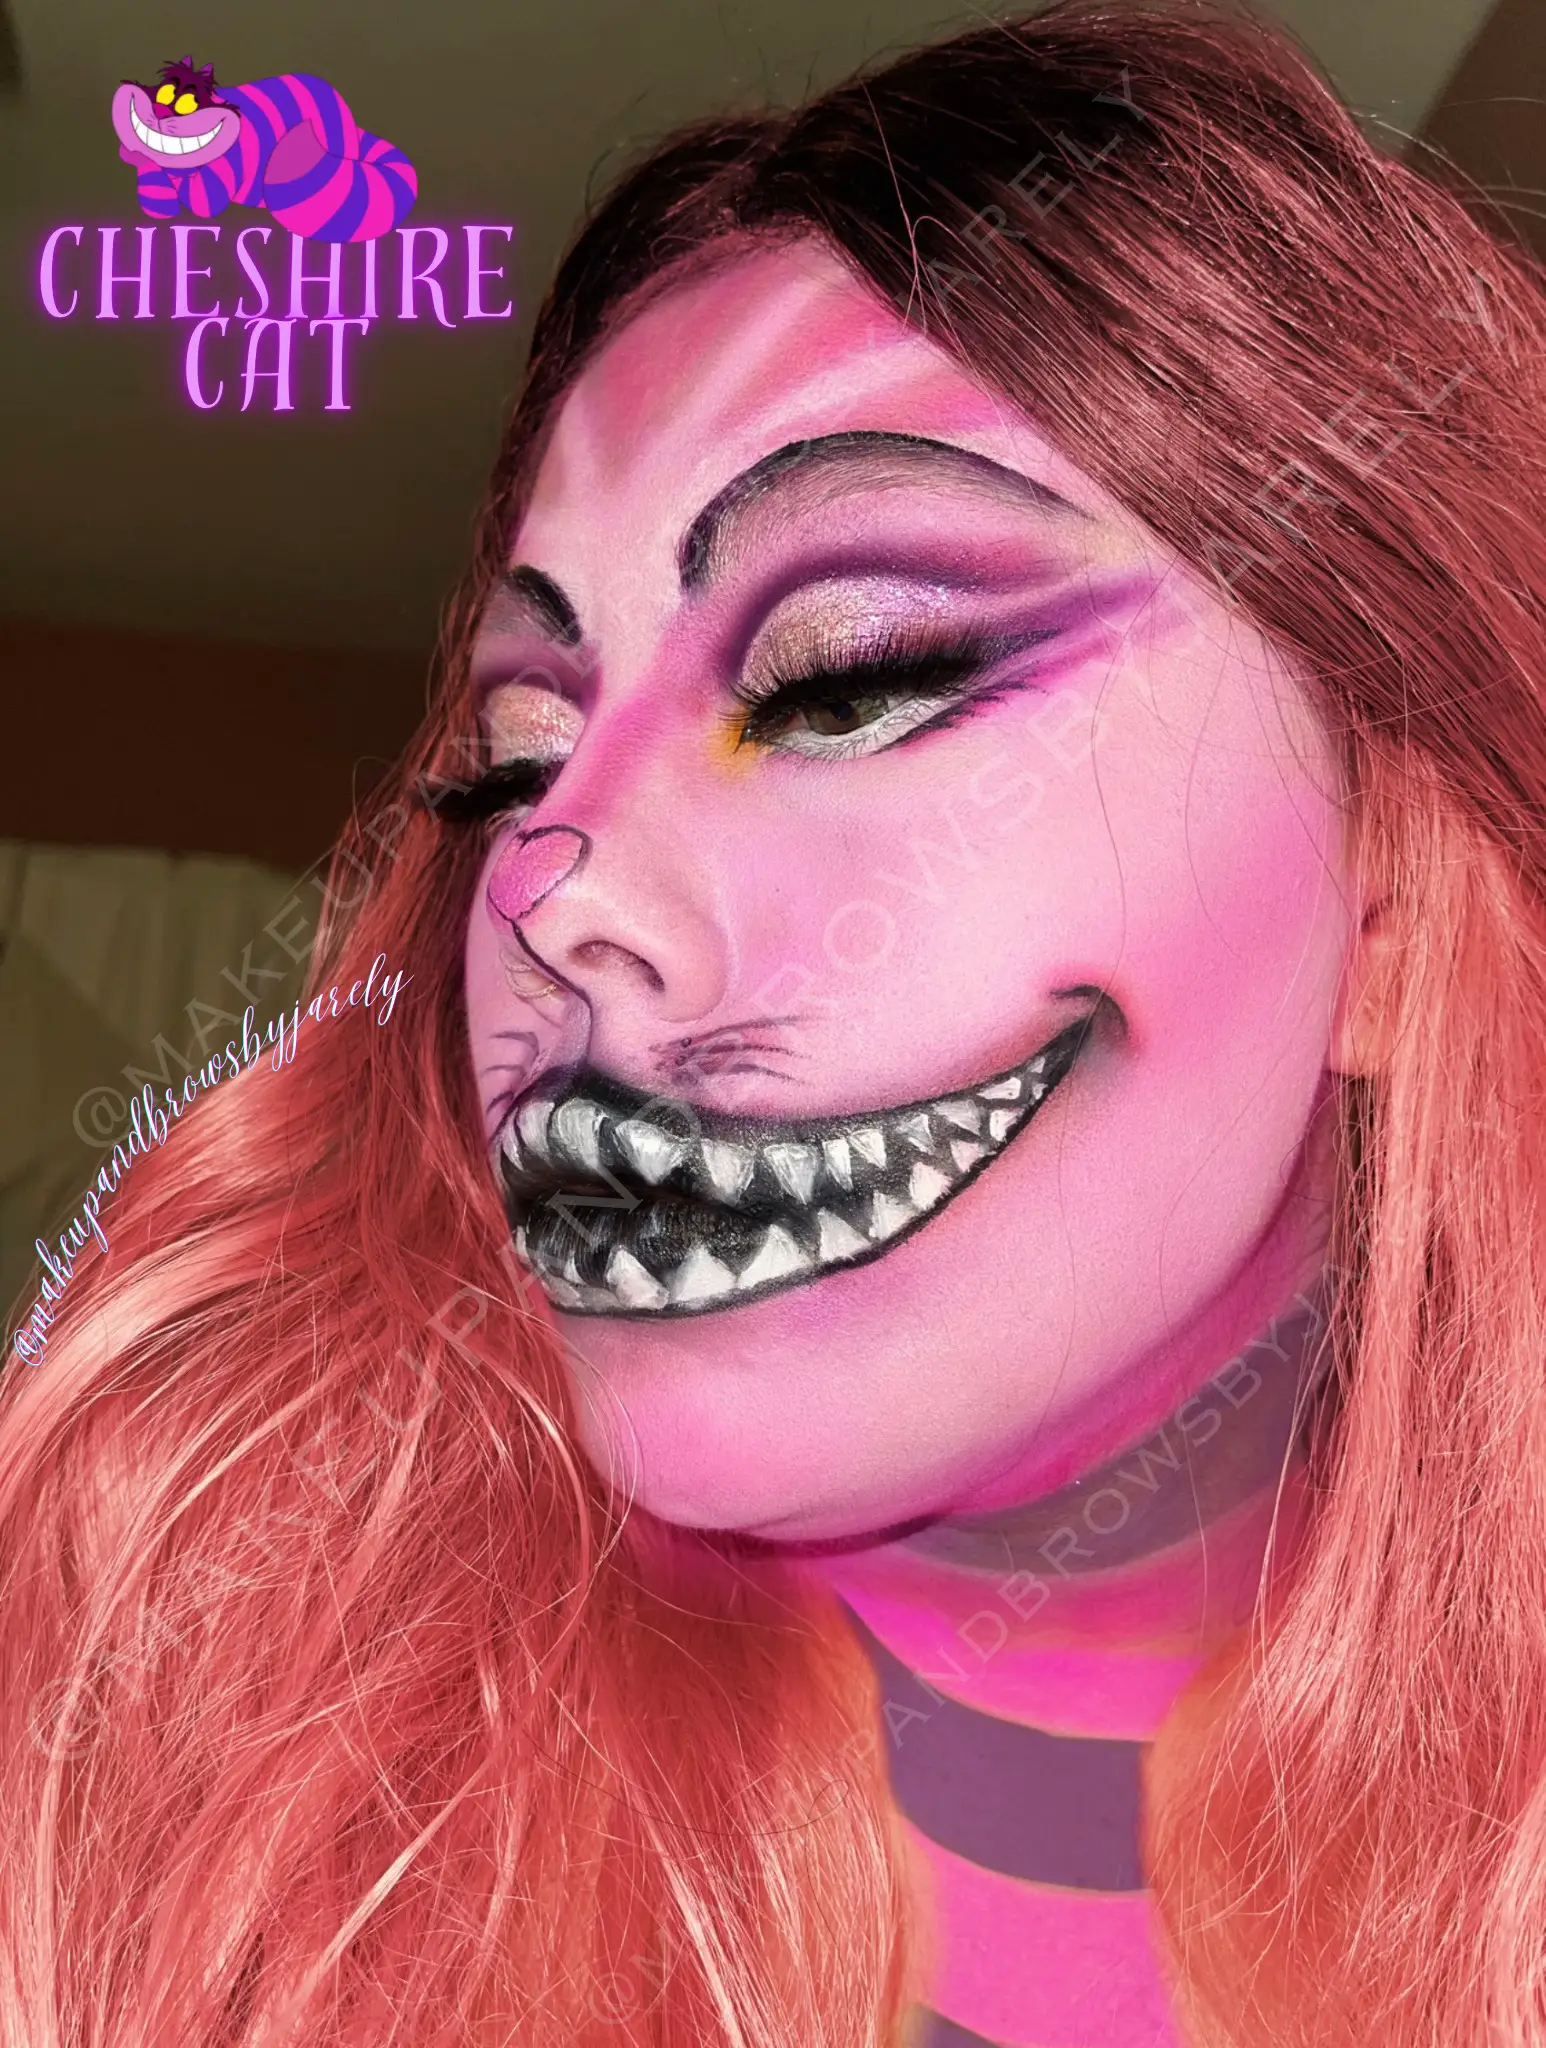 Cheshire Cat Gallery Posted By